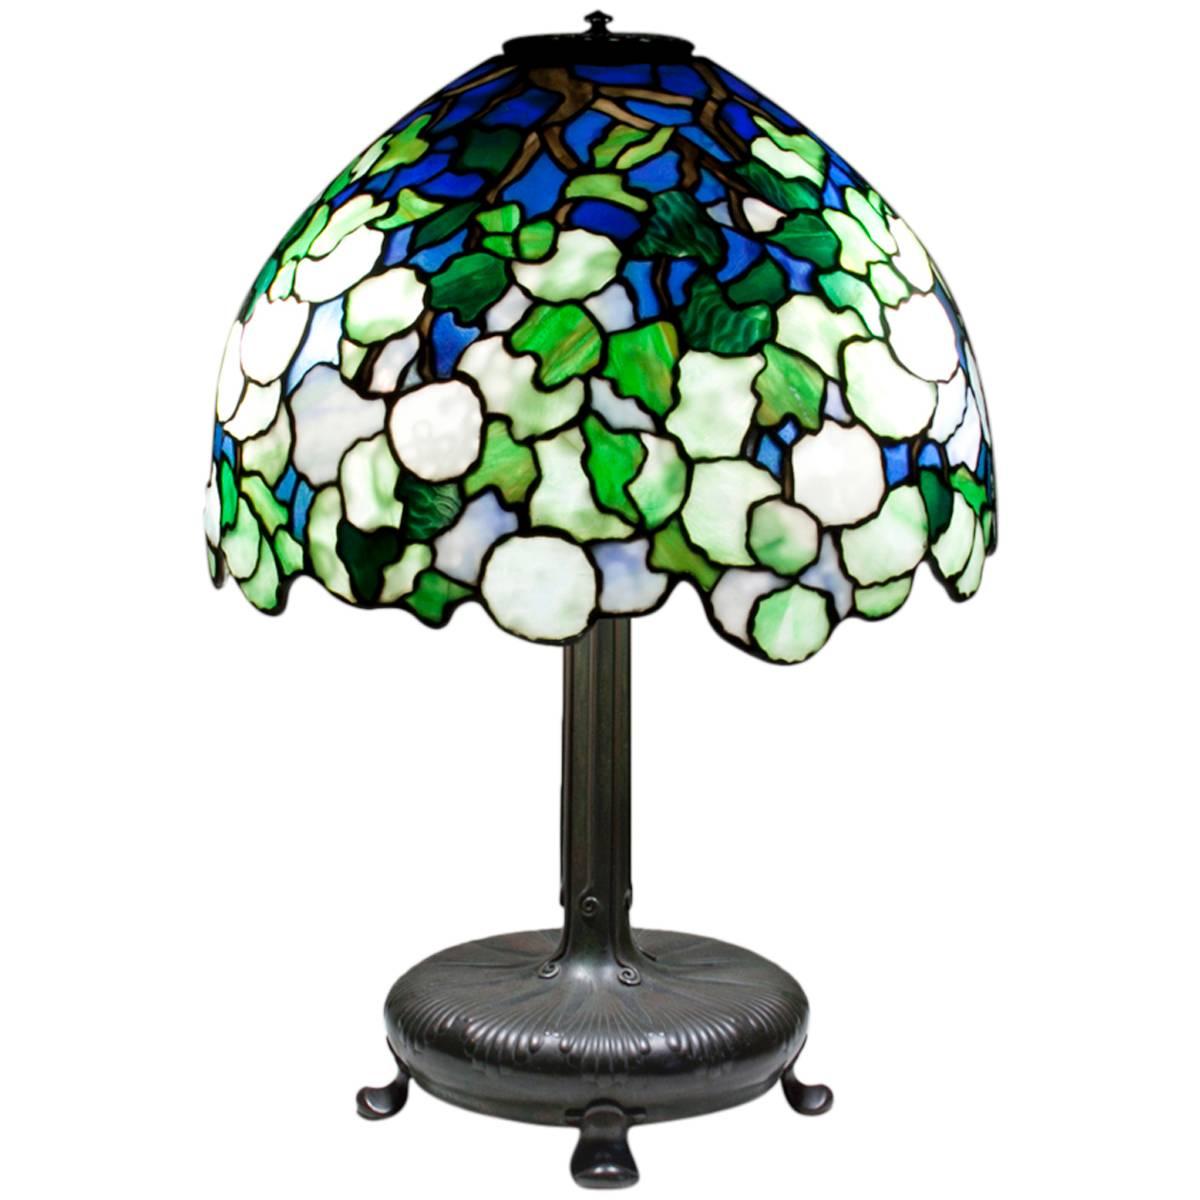 Tiffany Studios 'Snowball' Table Lamp For Sale